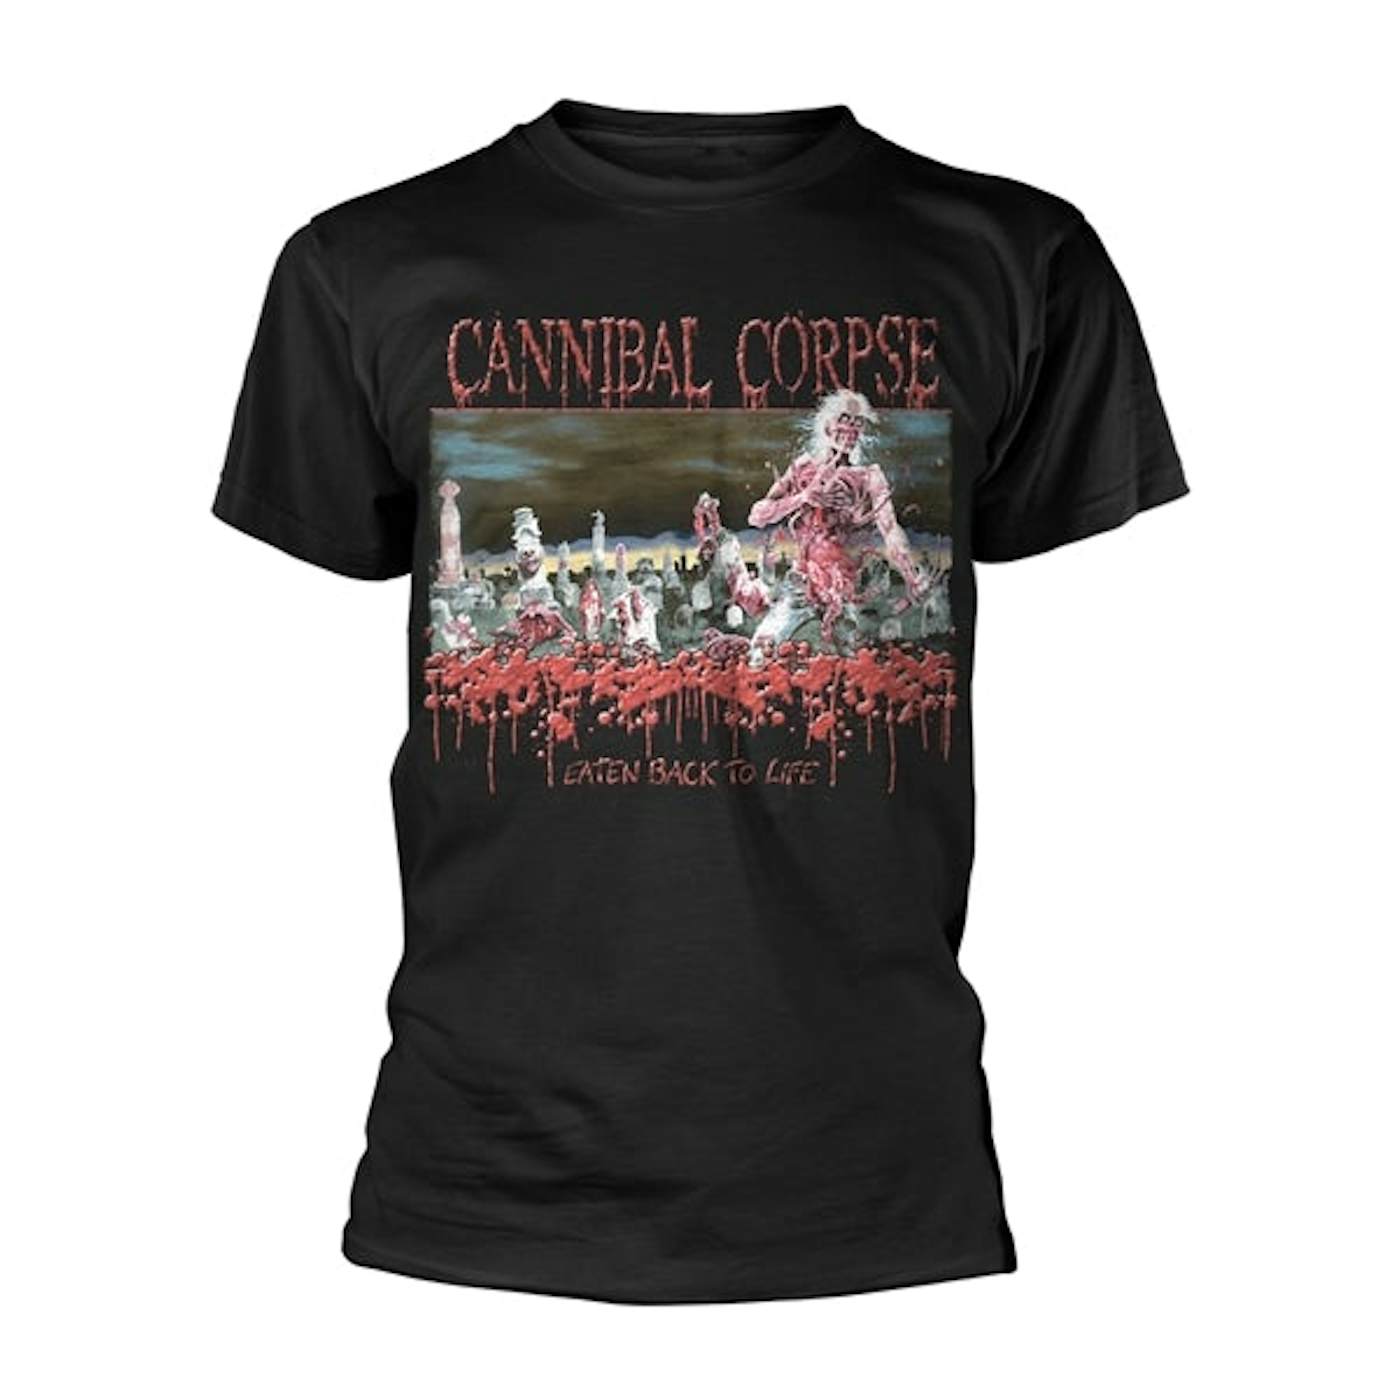 Cannibal Corpse T-Shirt - Eaten Back To Life